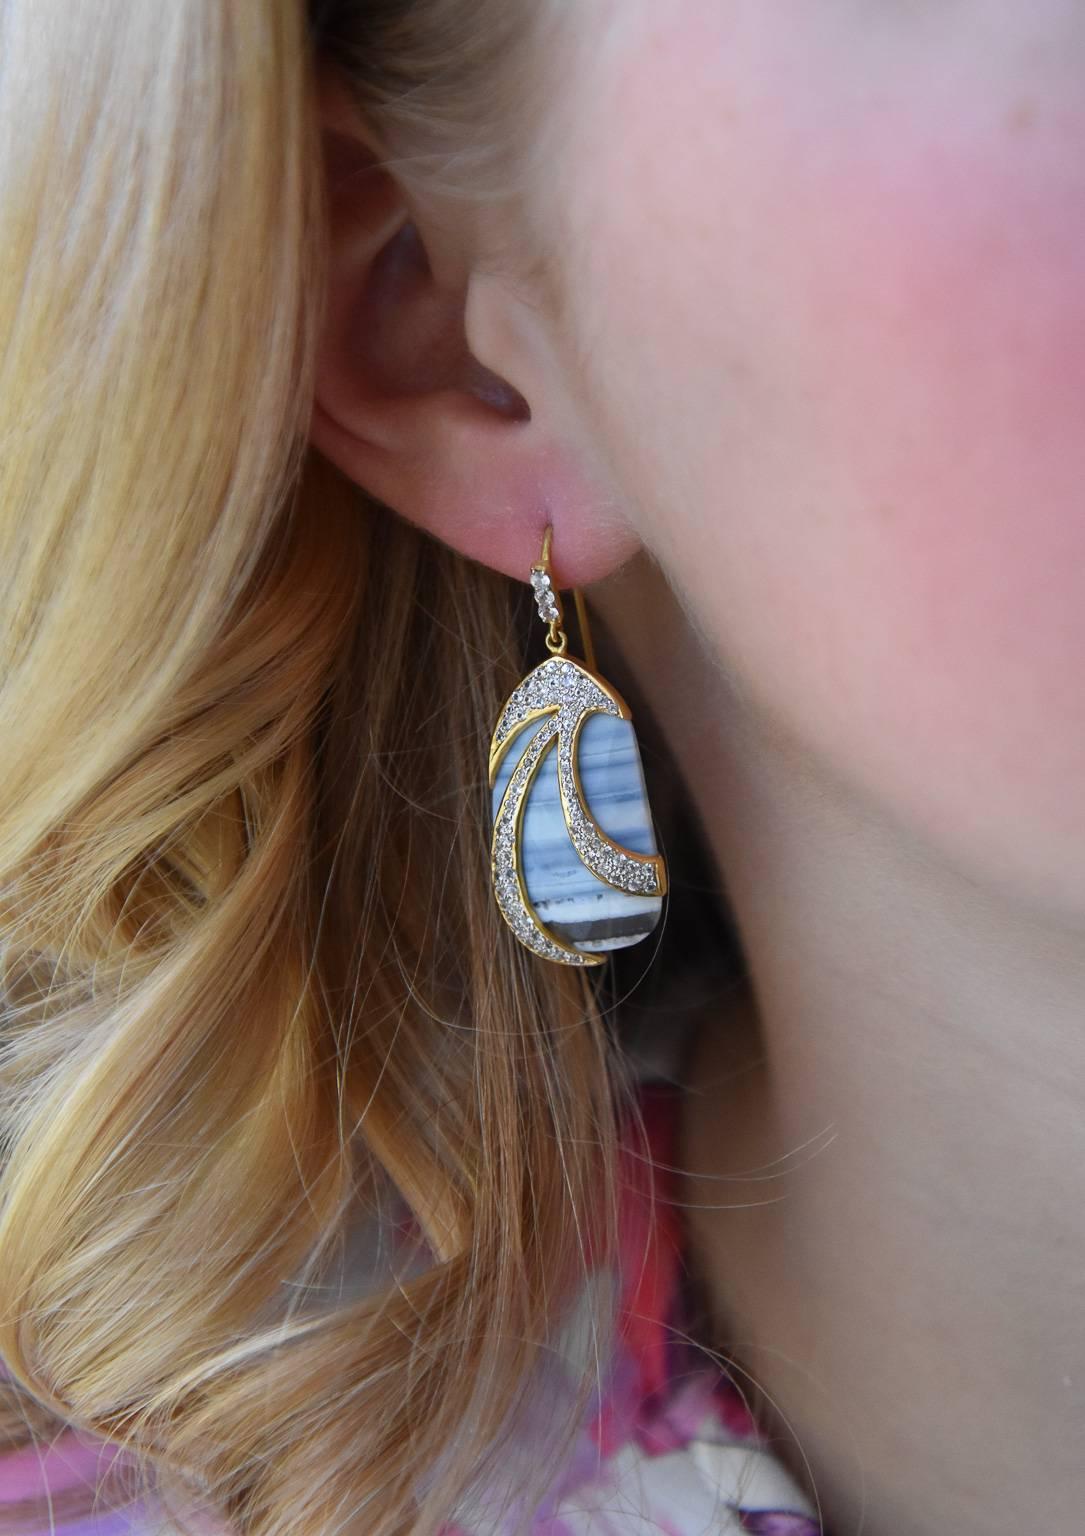 These one of a kind earrings are made with beautiful striped African opals, surrounded in organically shaped curved stripes of sparkly white sapphires.  They are set in Lauren Harper's signature 18kt Gold matte finish, perfect for daytime or evening